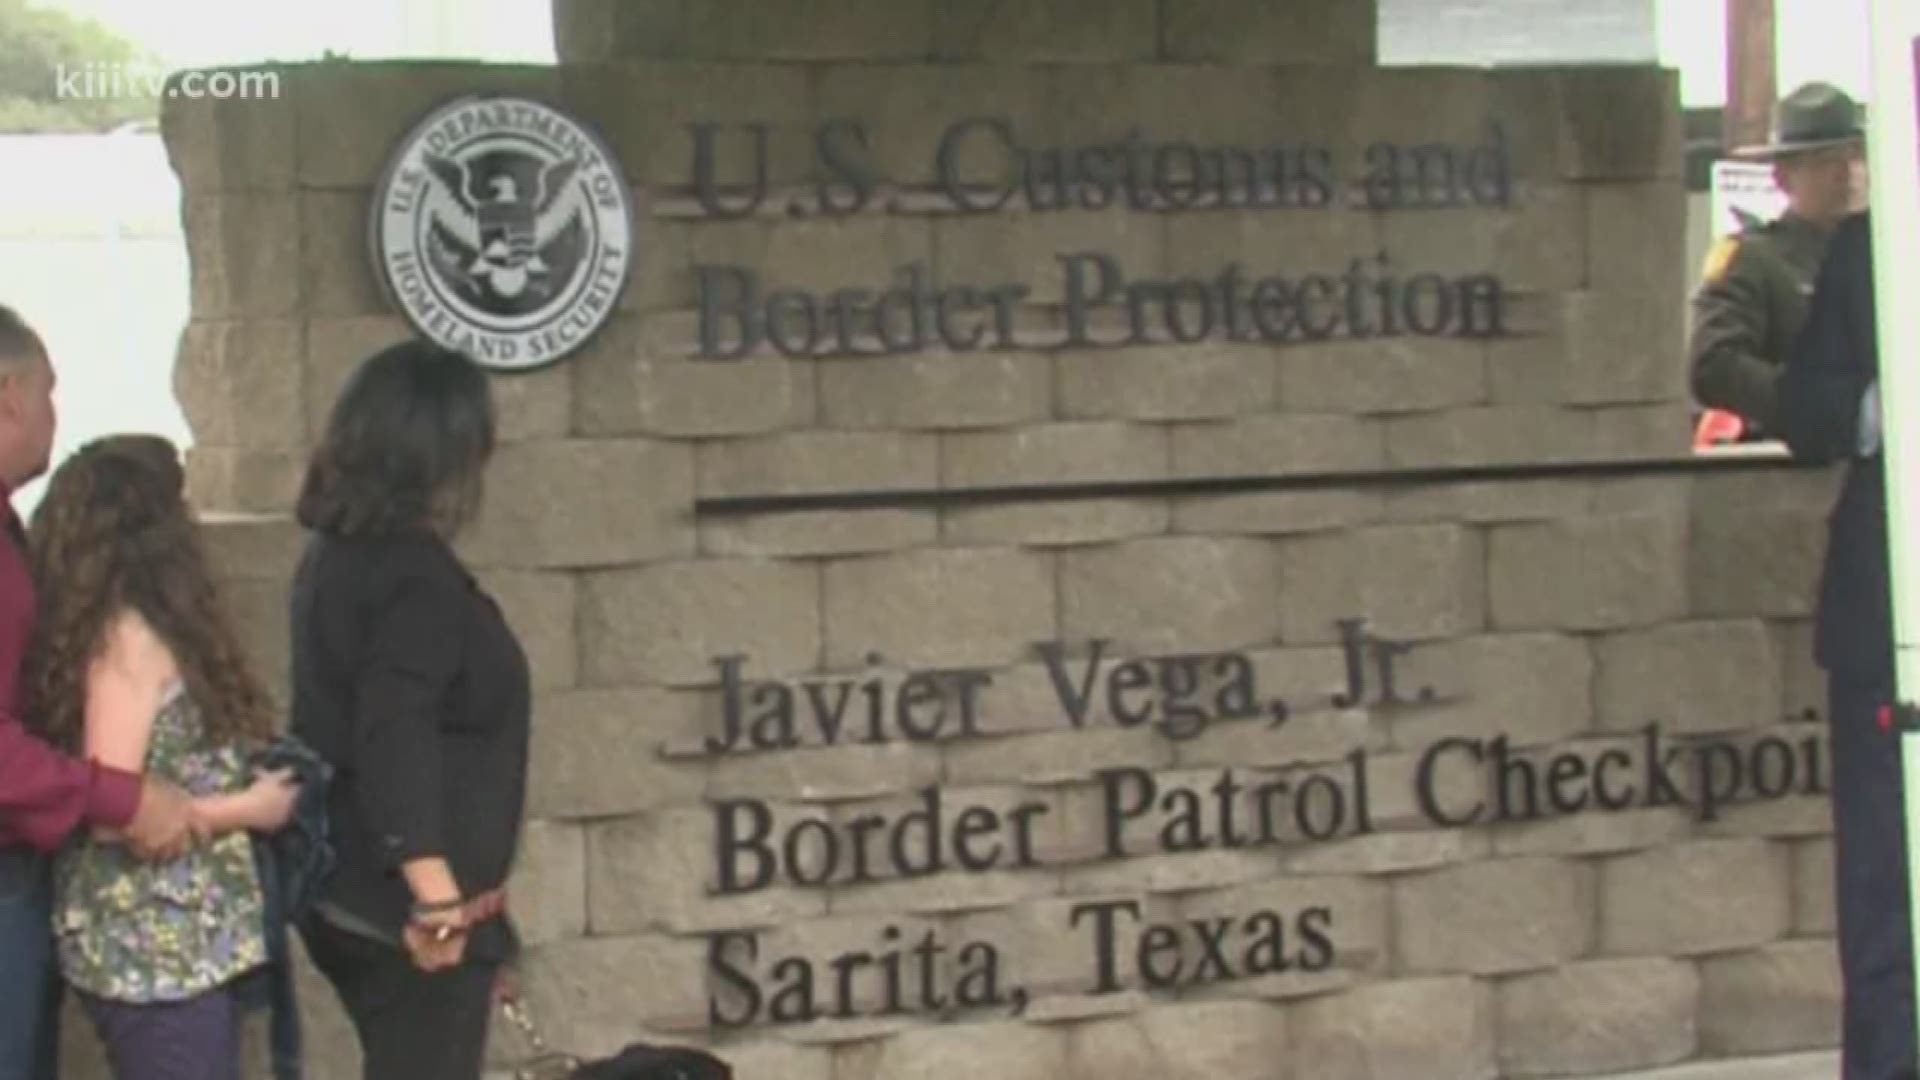 Drivers heading north on Highway 77 pass through Sarita, Texas, and they will now see Vega's name along the checkpoint.